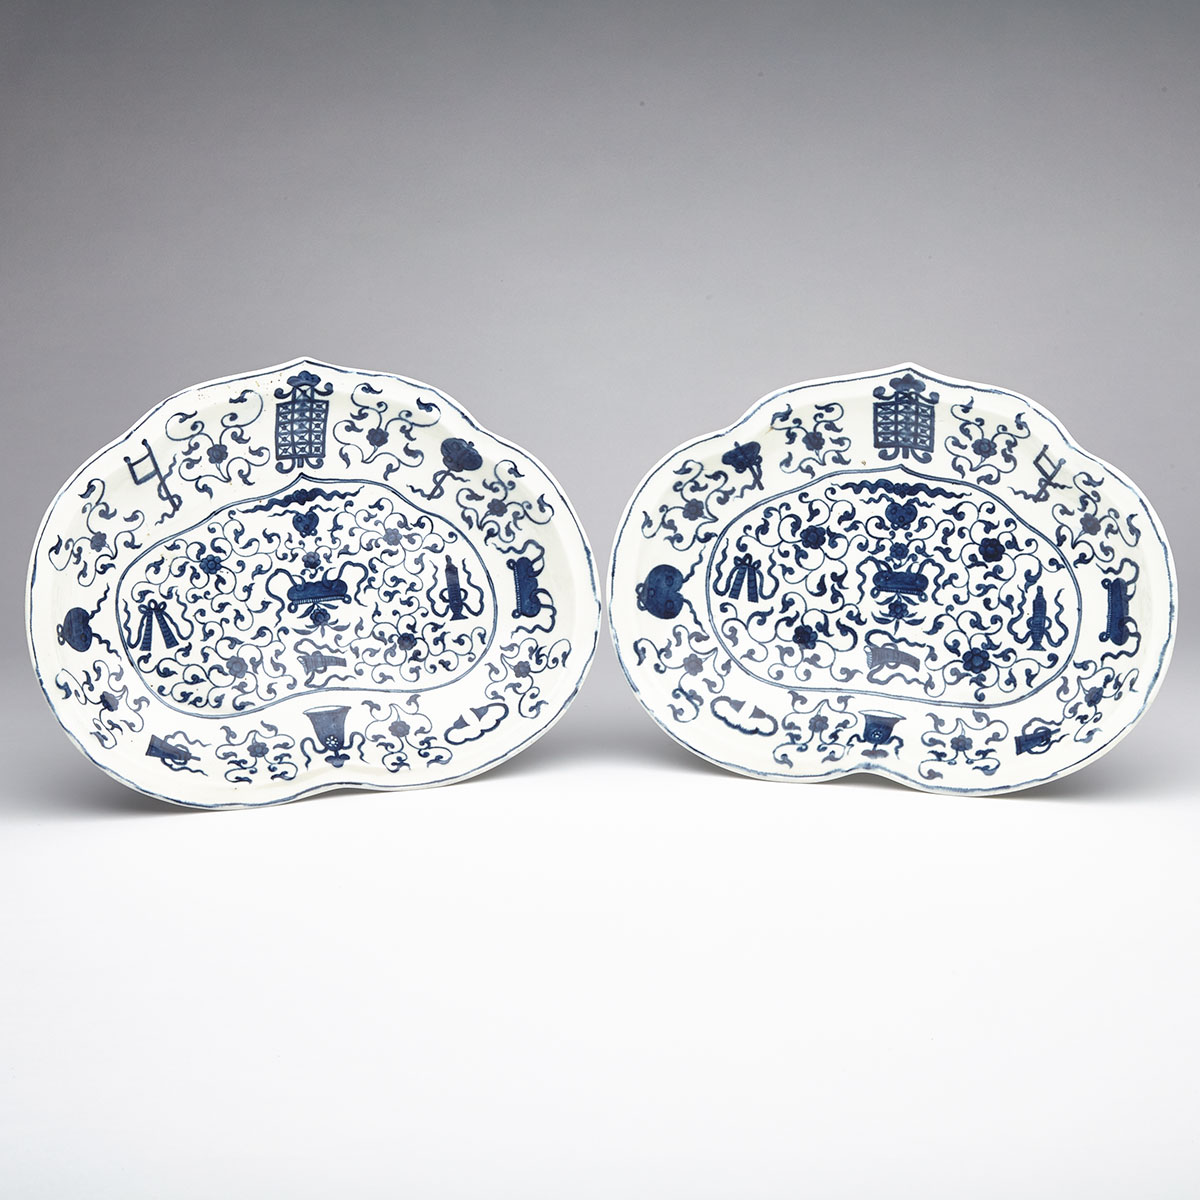 Pair of Worcester ‘Hundred Antiques’ Heart Shaped Dishes, c.1770-80